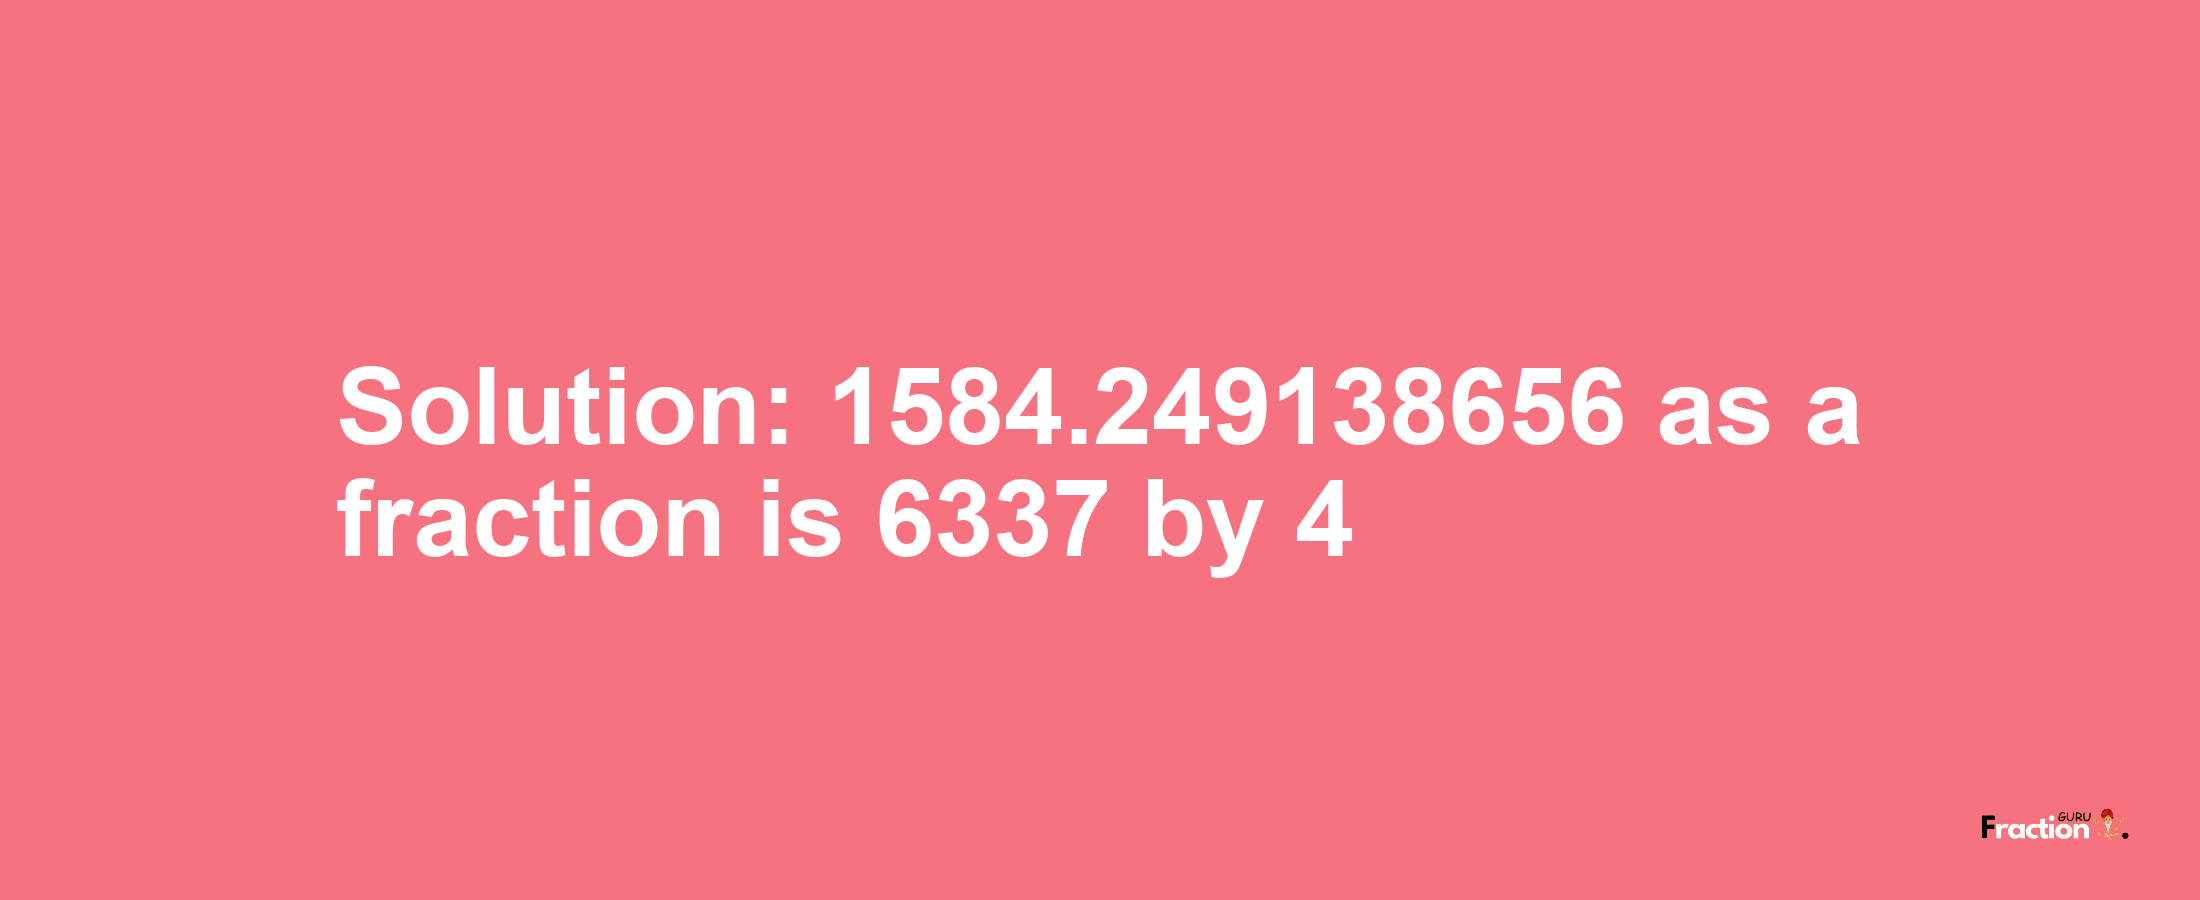 Solution:1584.249138656 as a fraction is 6337/4